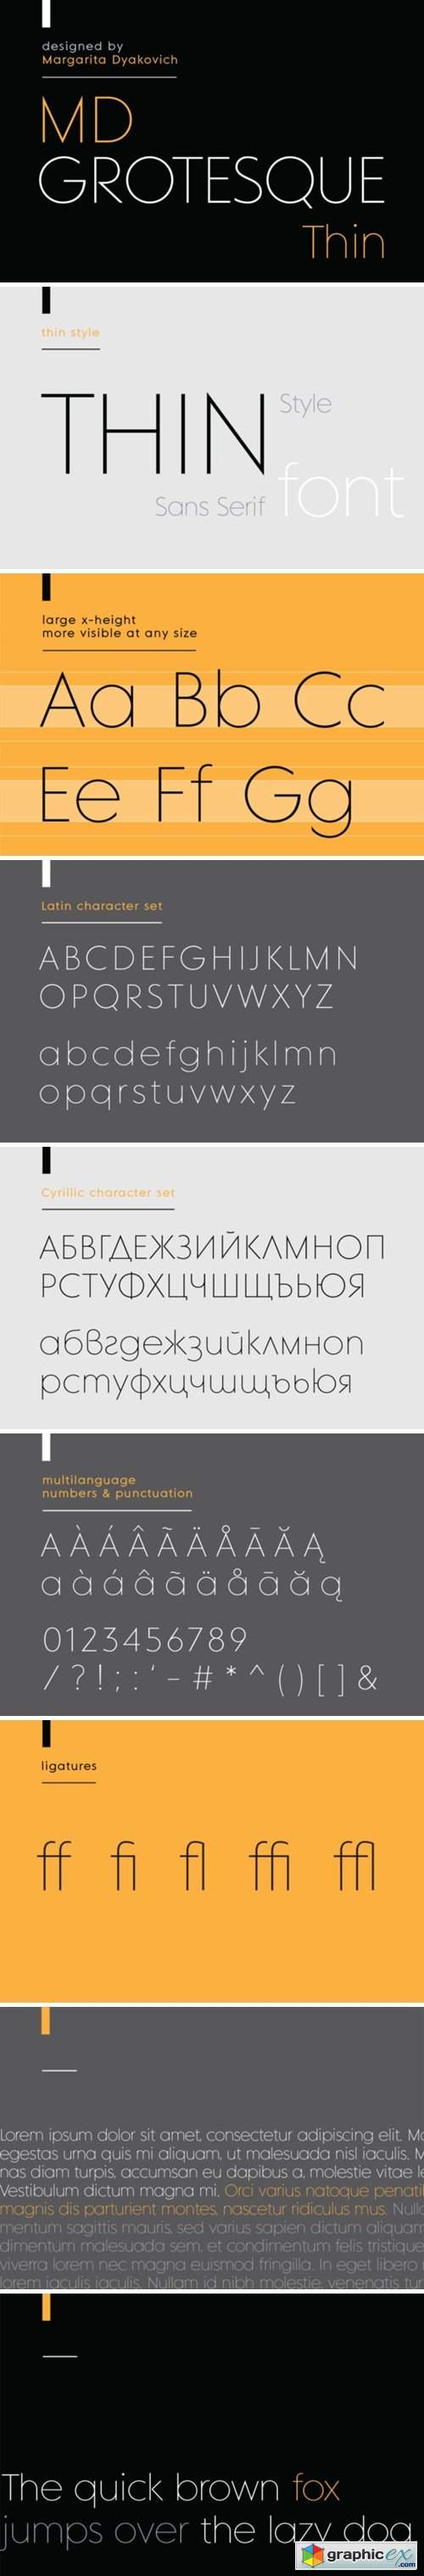 MD Grotesque Thin Font